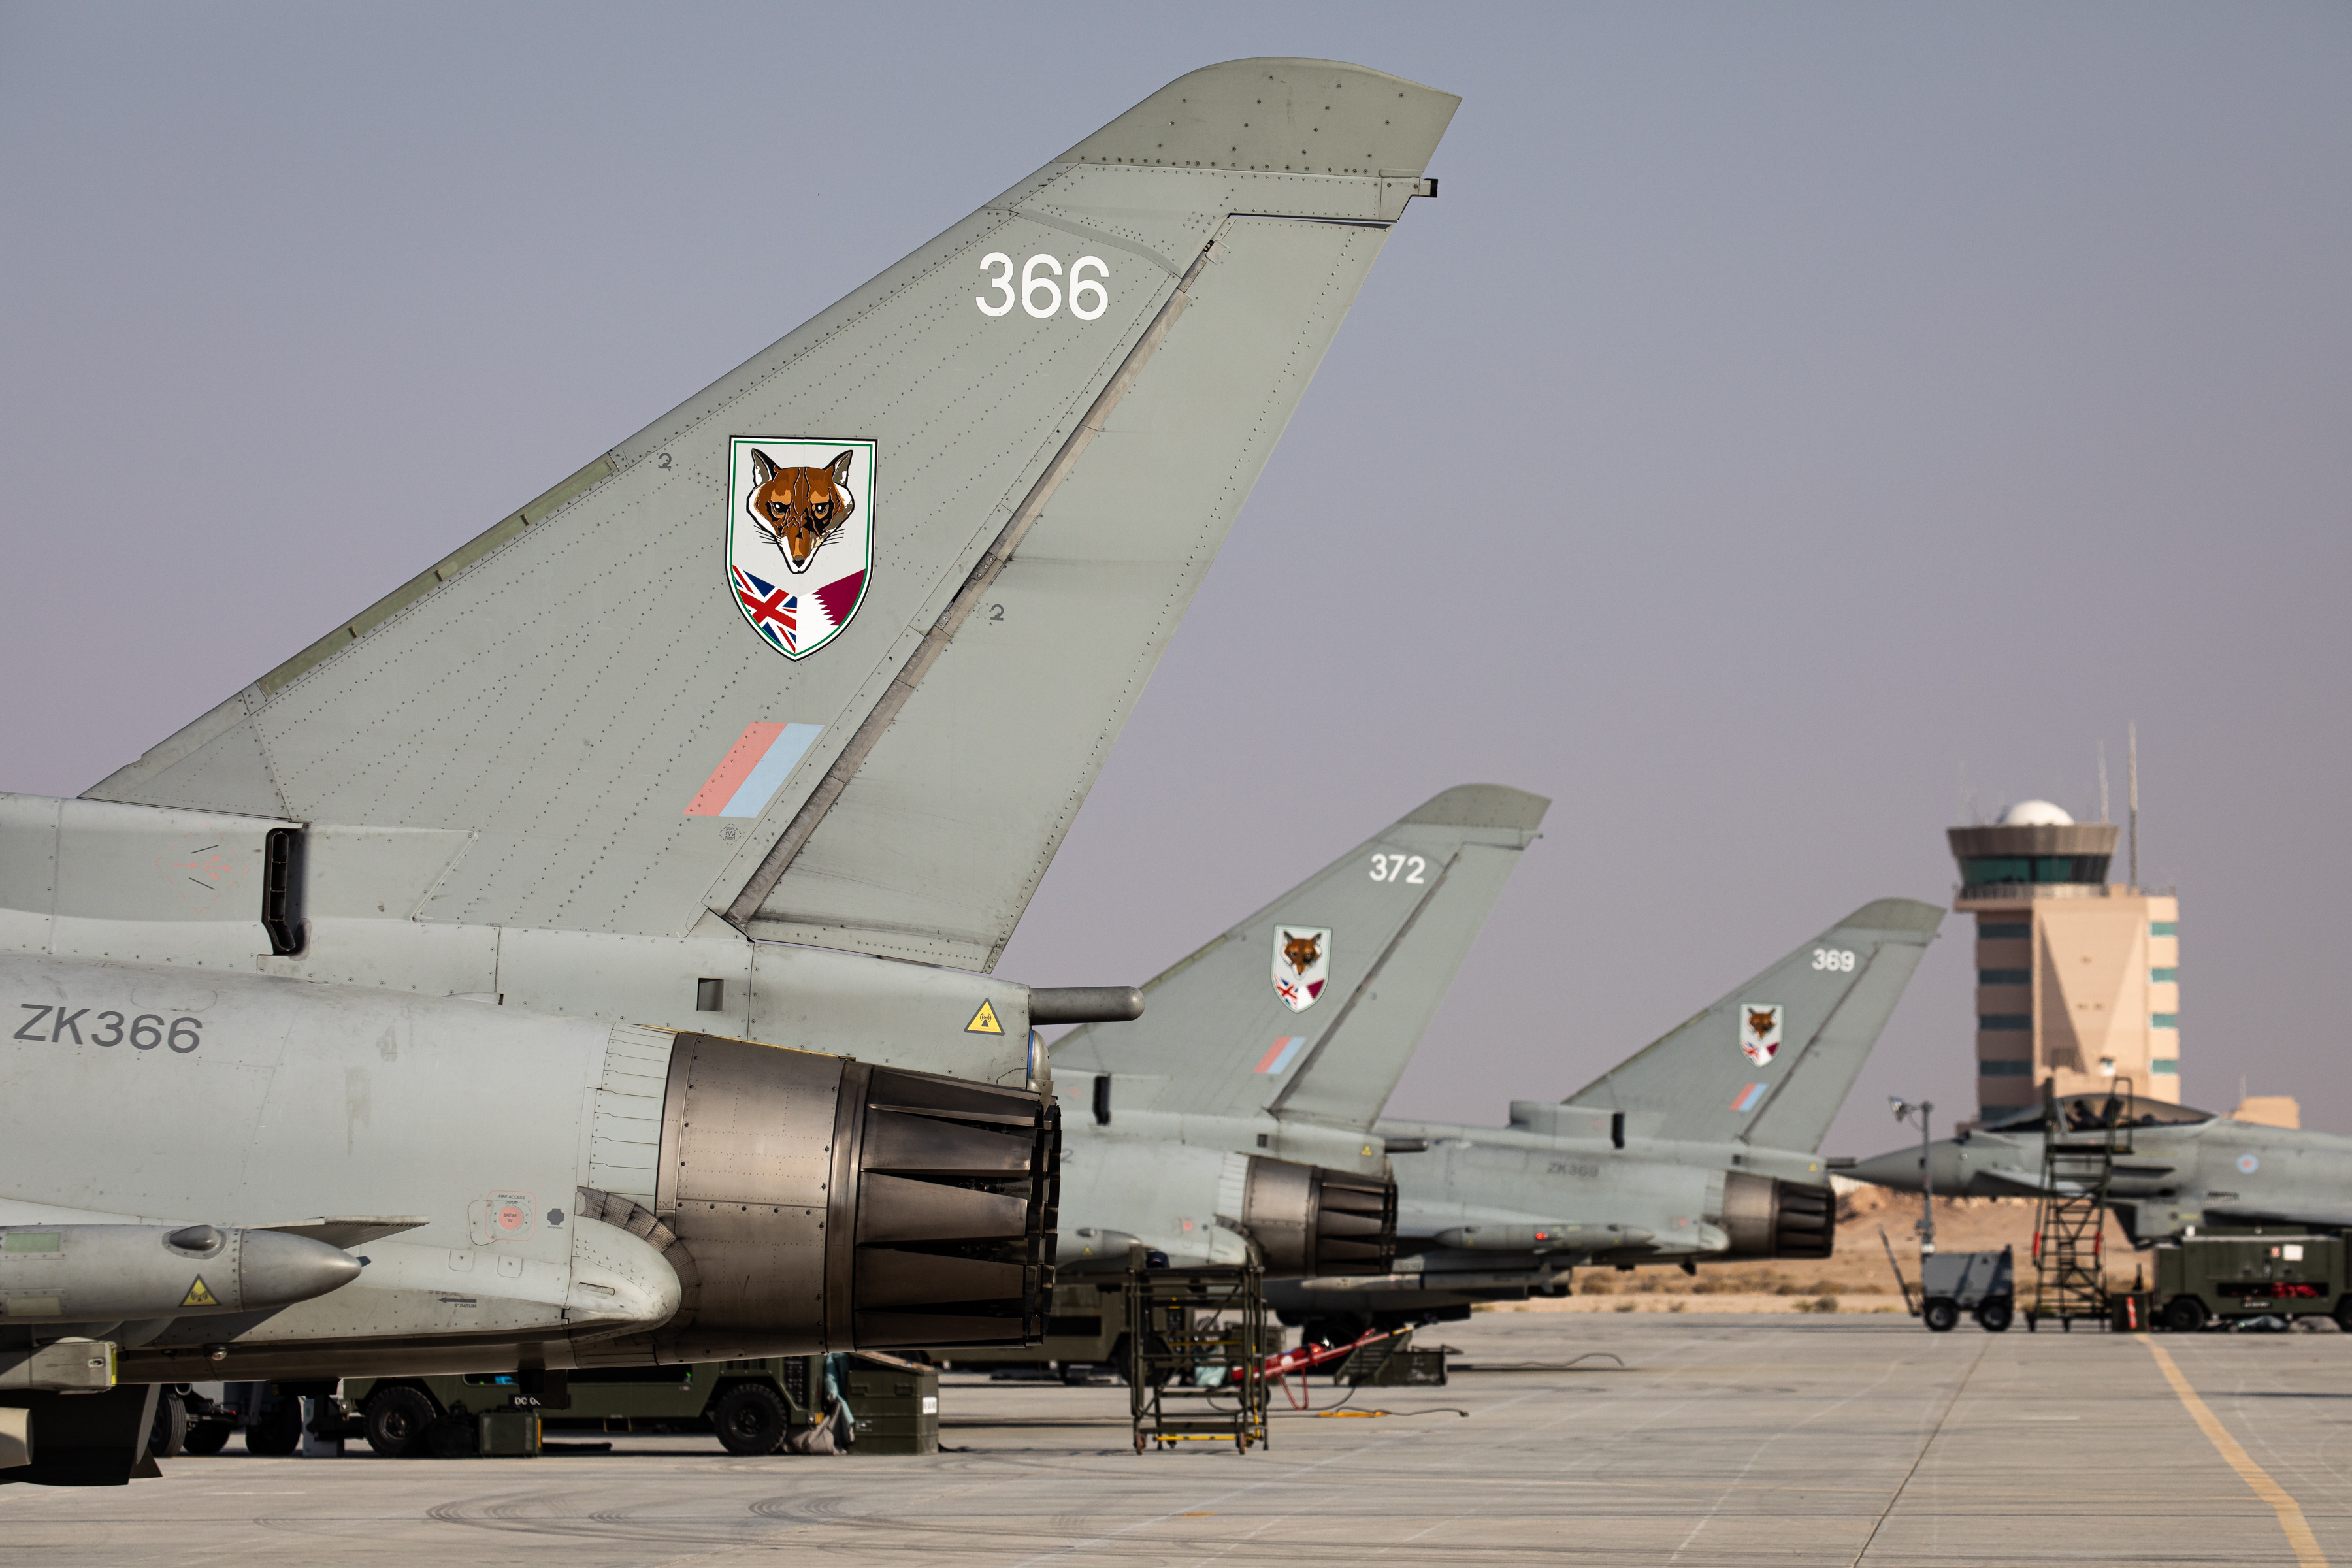 Tail end of Typhoon aircraft lined up on the airfield